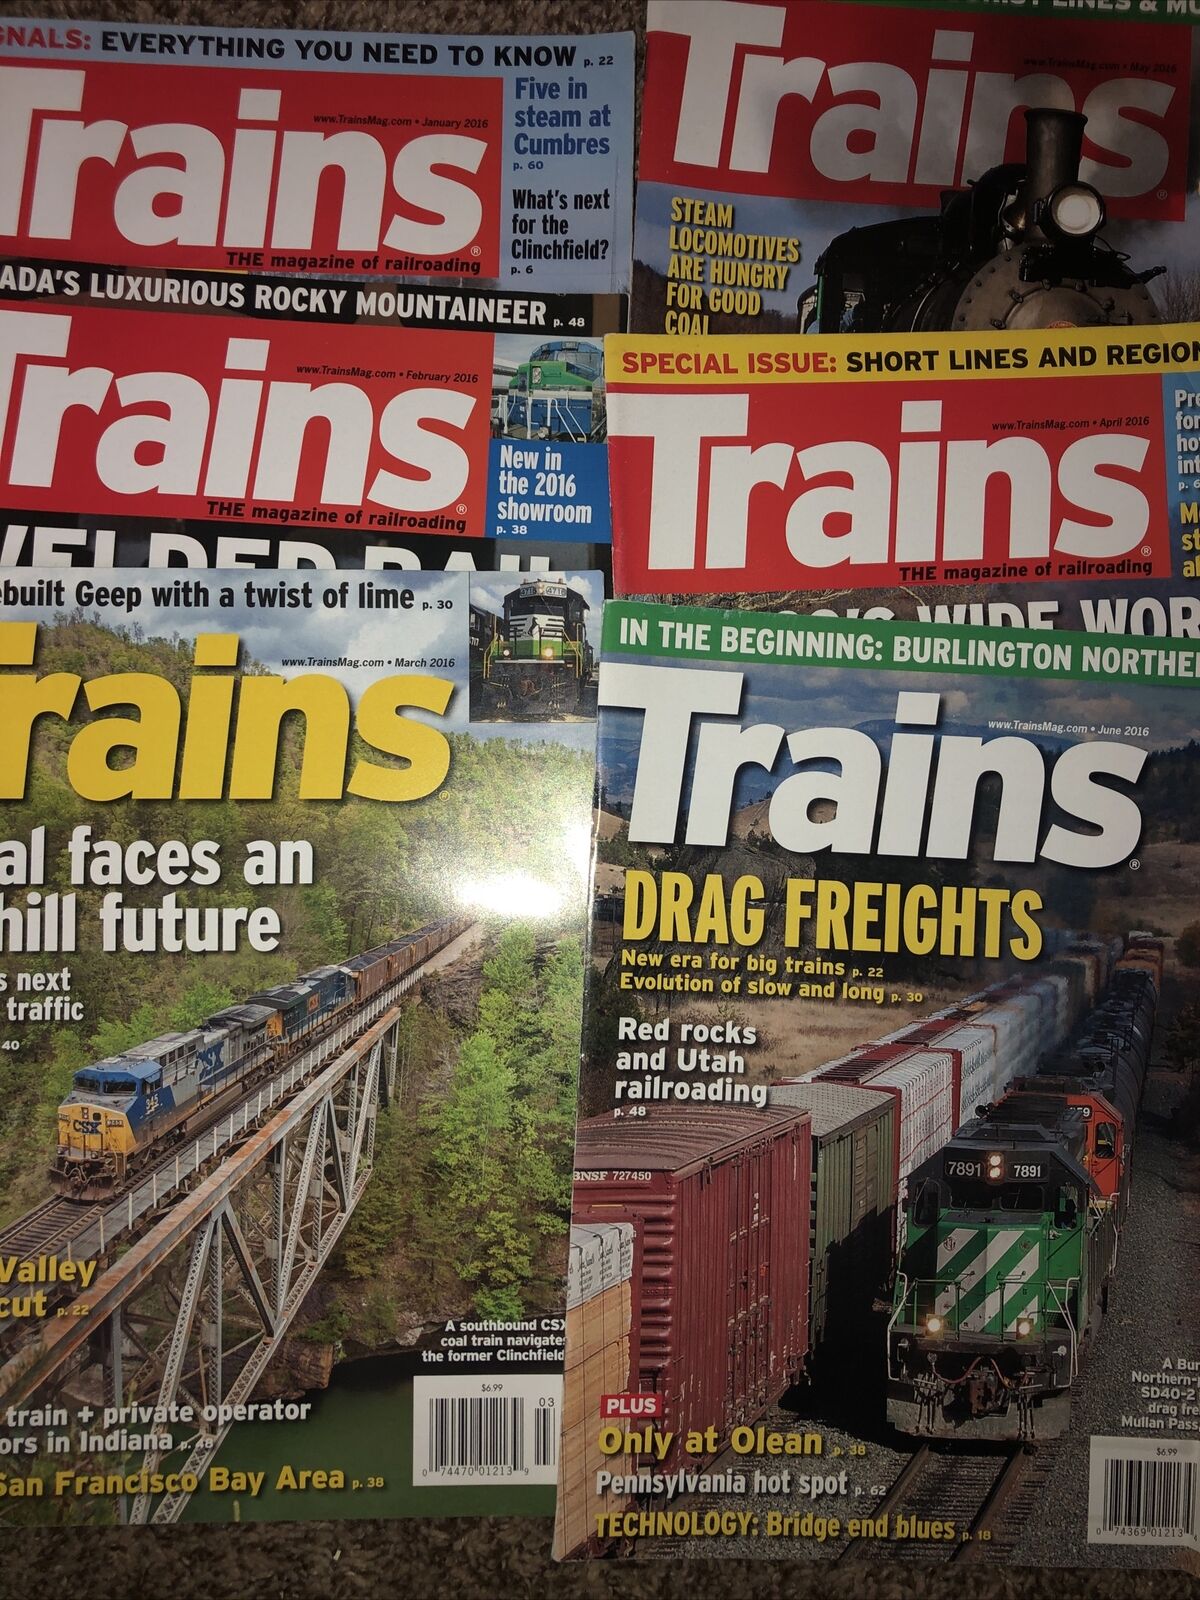 Trains 2016 Magazine Jan Feb March April May June 6 Issues